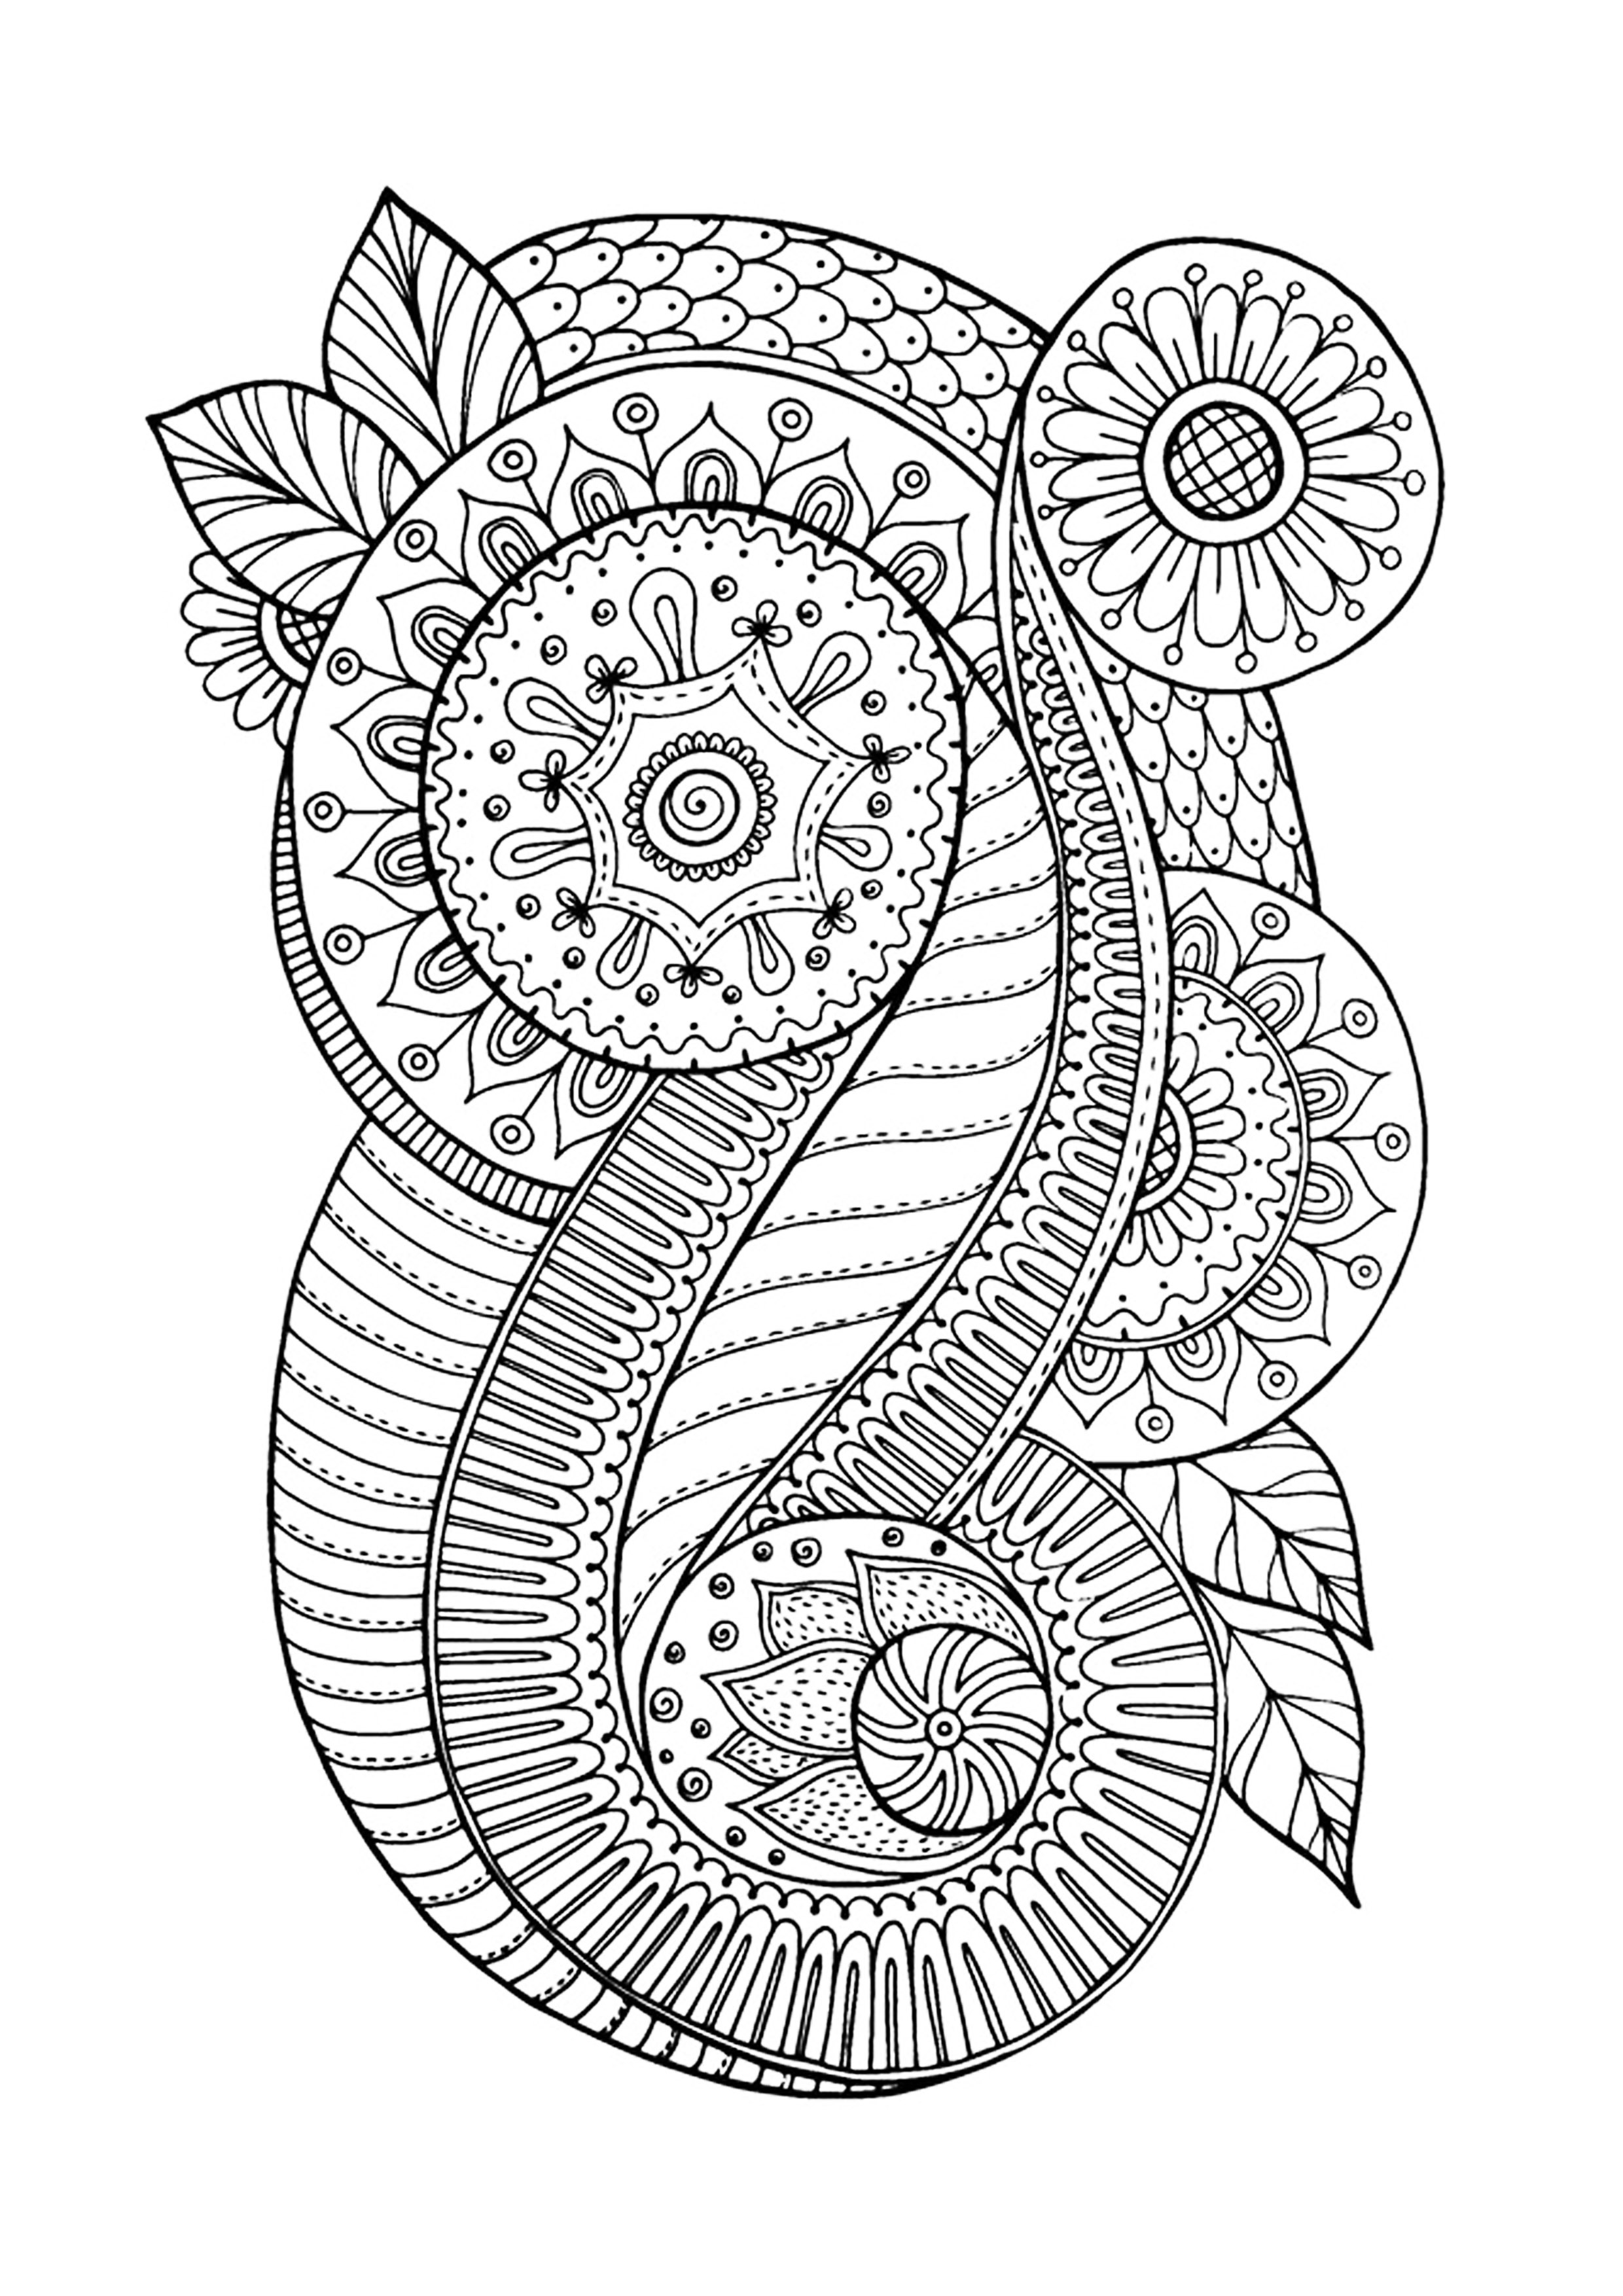 Zen & Anti stress Coloring page Abstract pattern inspired by flowers n°